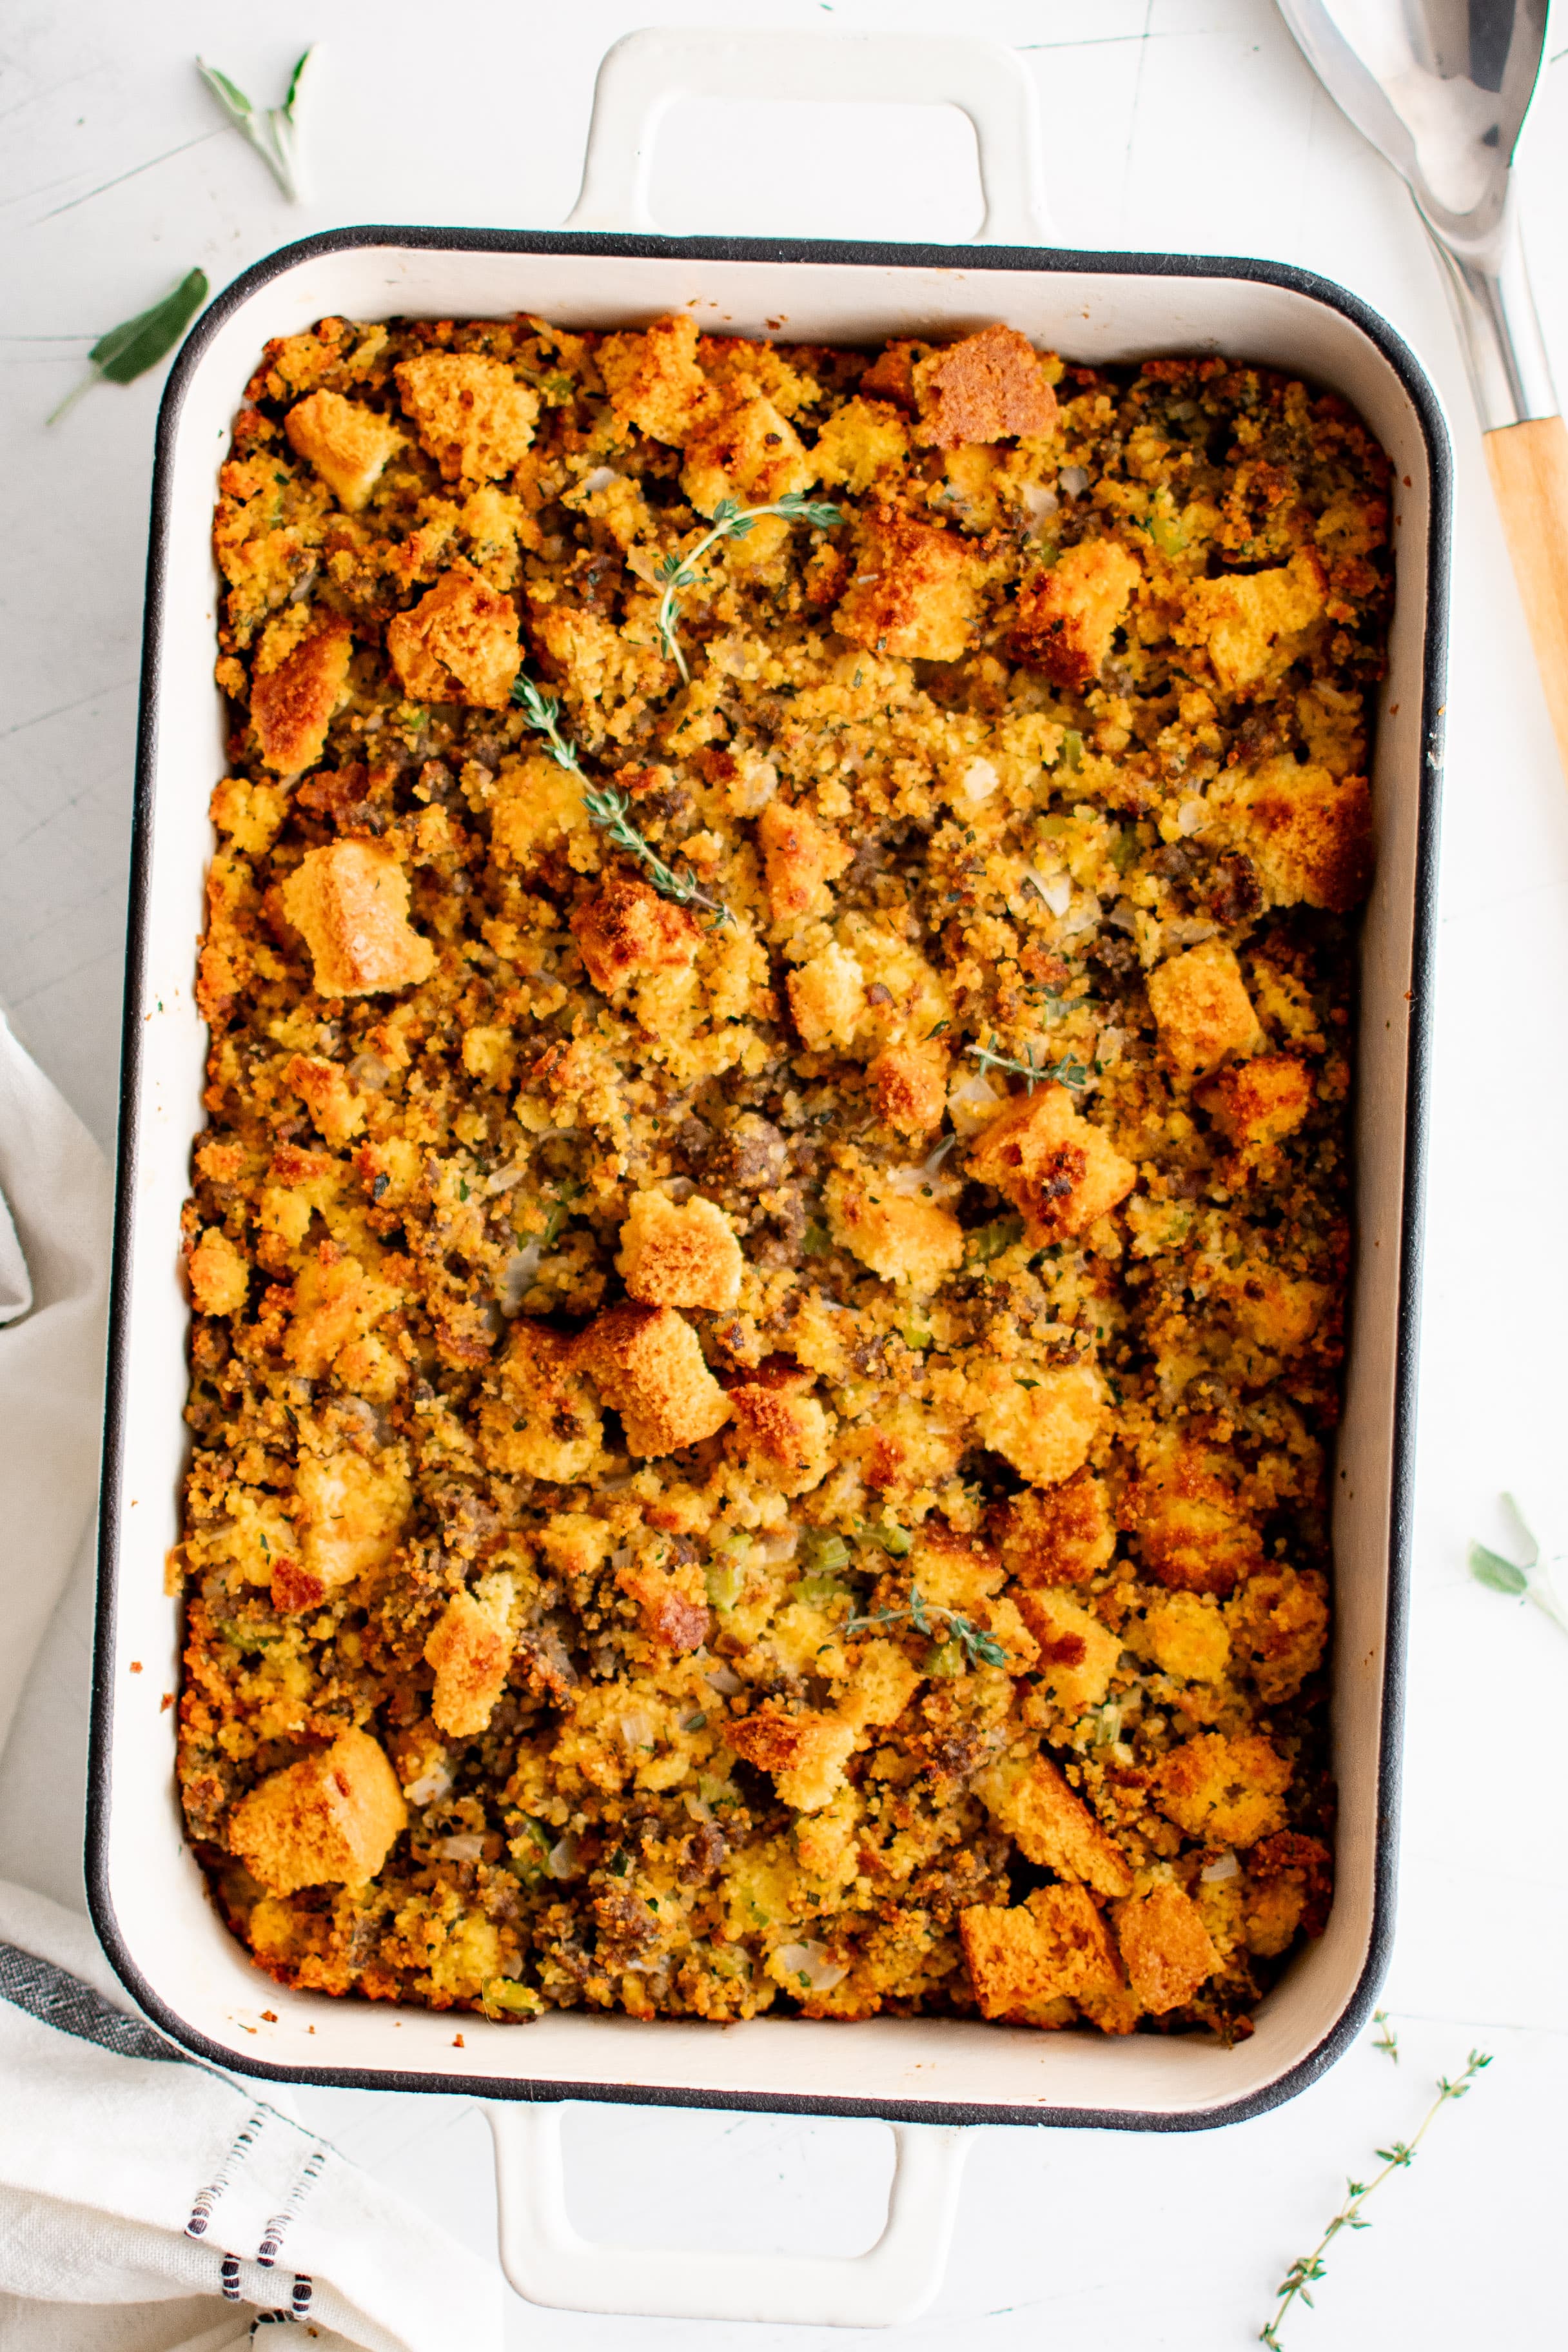 Overhead image of a large rectangle baking dish filled with cornbread dressing with sausage and fresh herbs.